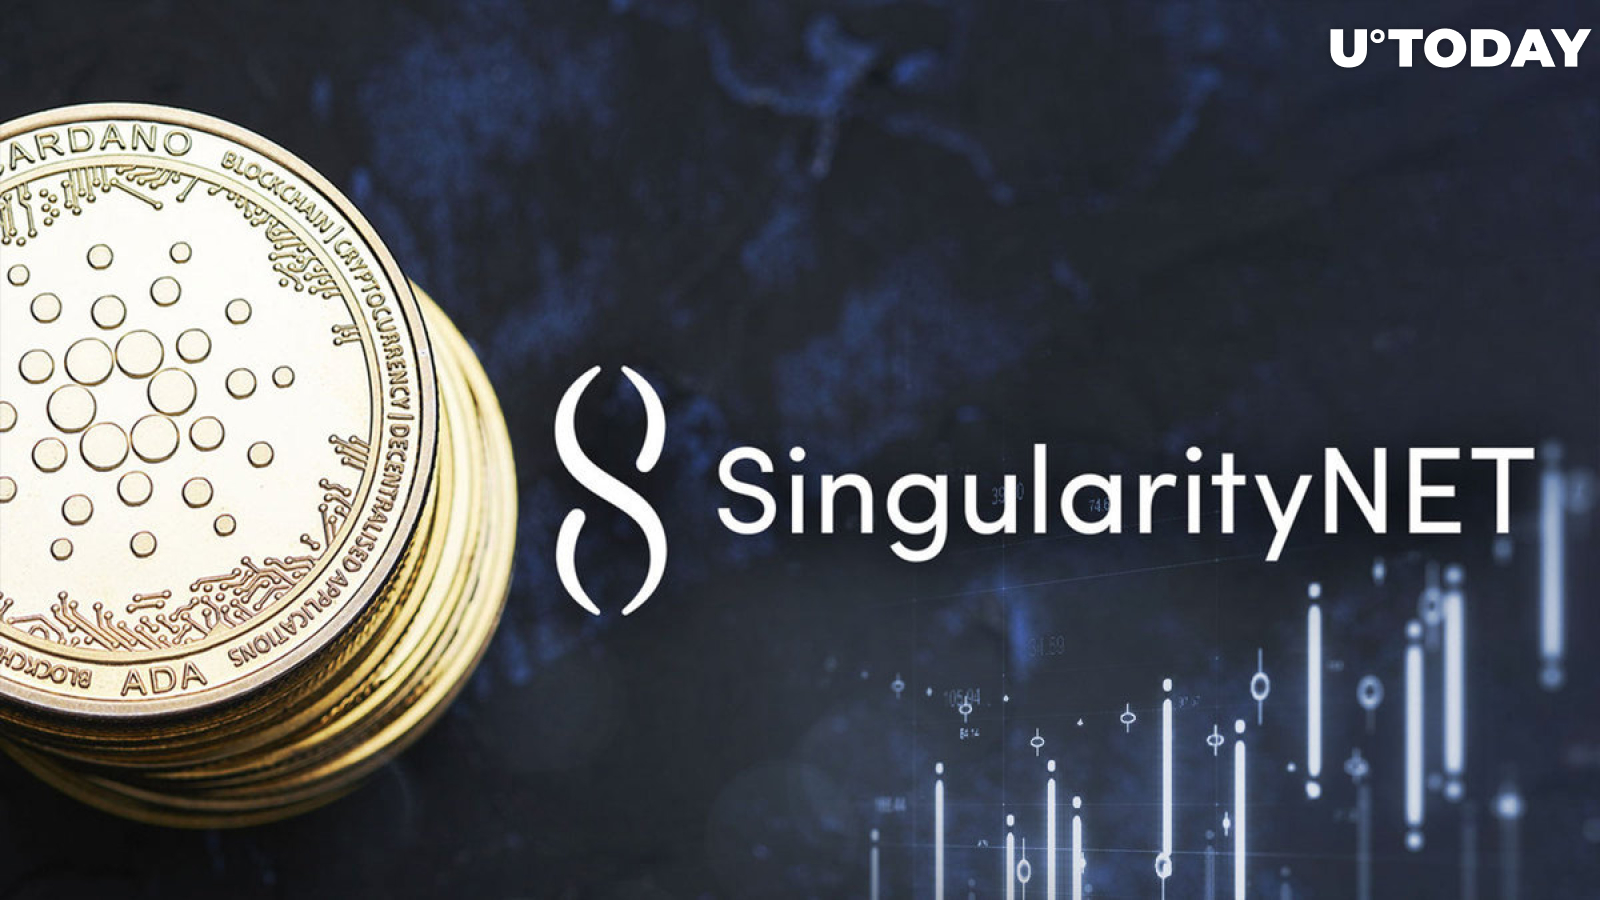 Cardano-Linked SingularityNET (AGIX) up 7%, Is This Bubble or Legit Run?